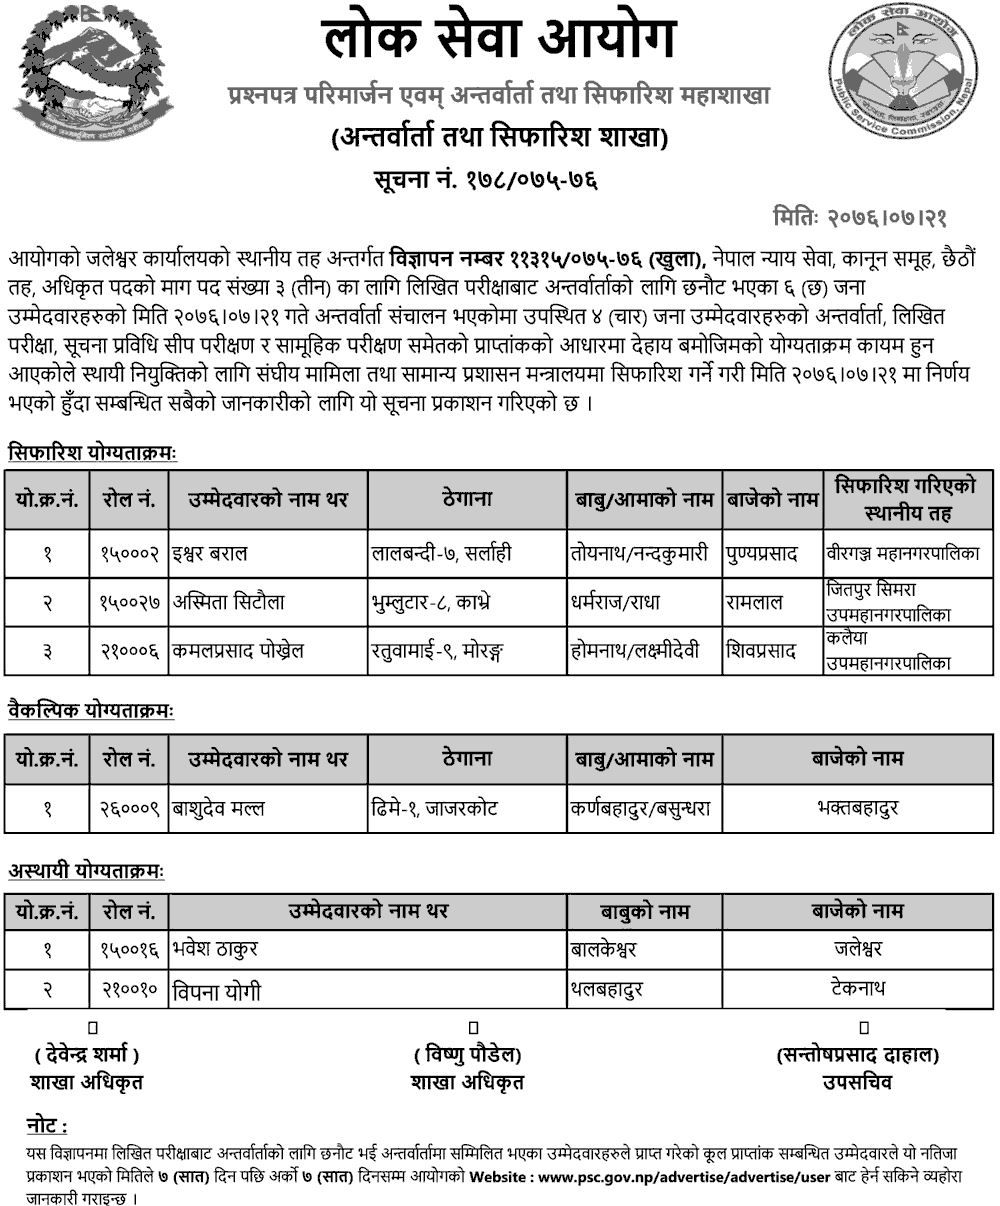 Lok Sewa Aayog Jaleshwor Local Level Law and Justice Final Result and Recommendations